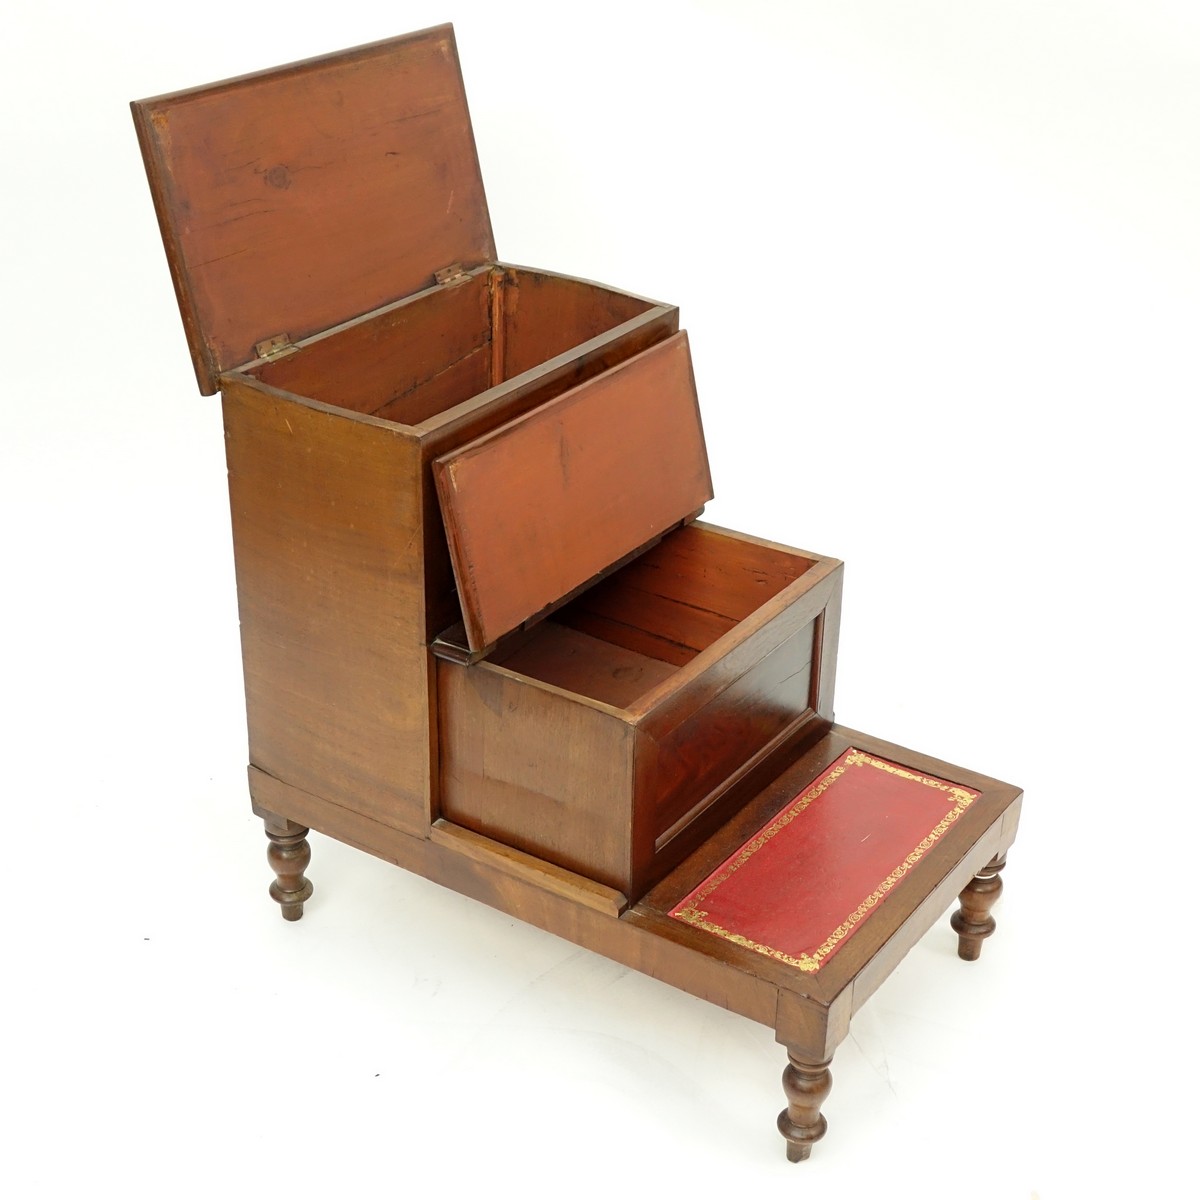 Victorian Mahogany and Tooled Leather Library Steps. Interior compartments.